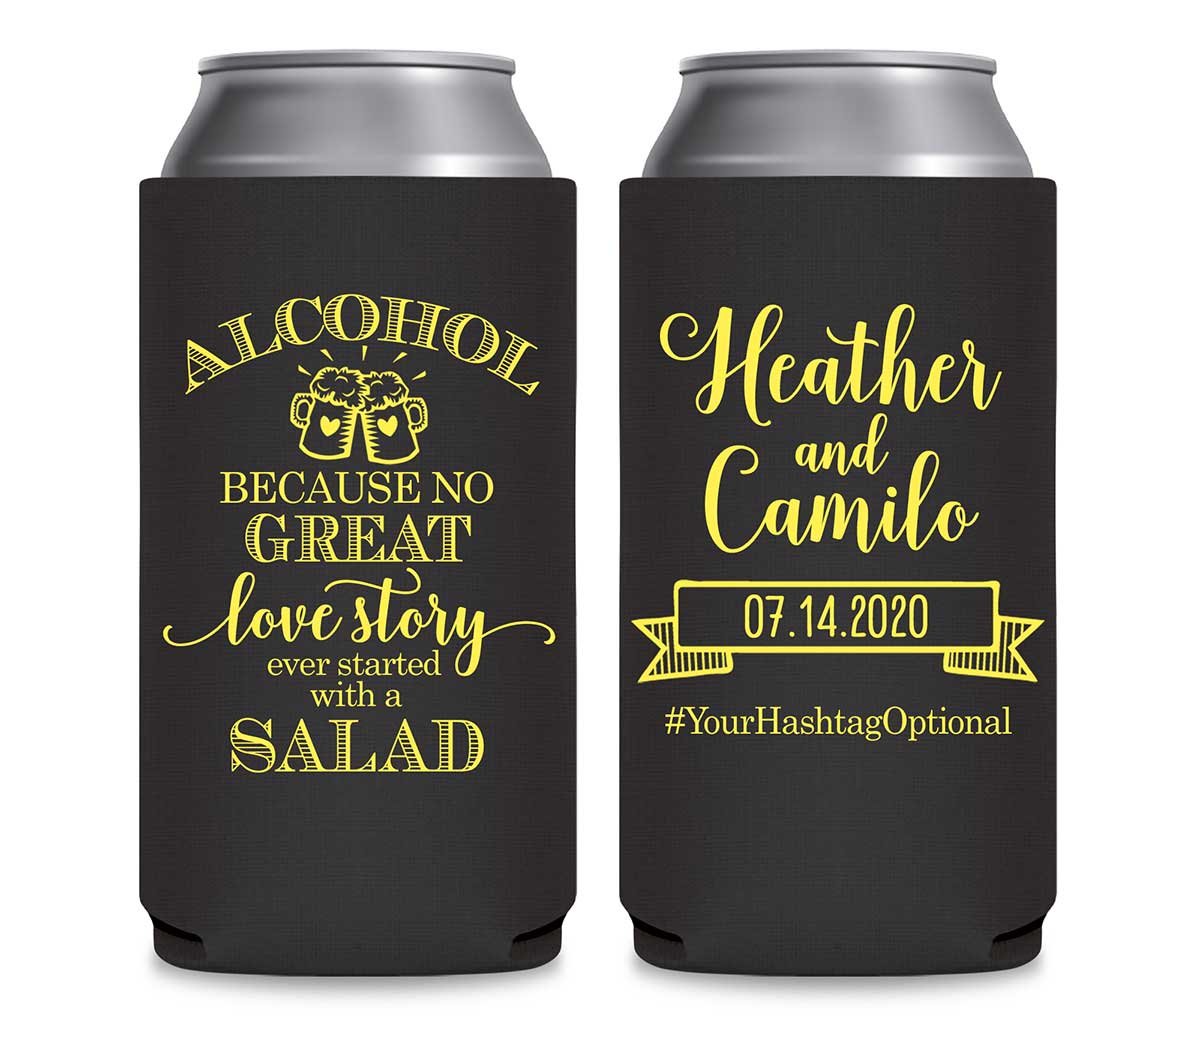 Alcohol Love Story No Salad 1A Foldable 8.3 oz Slim Can Koozies Wedding Gifts for Guests